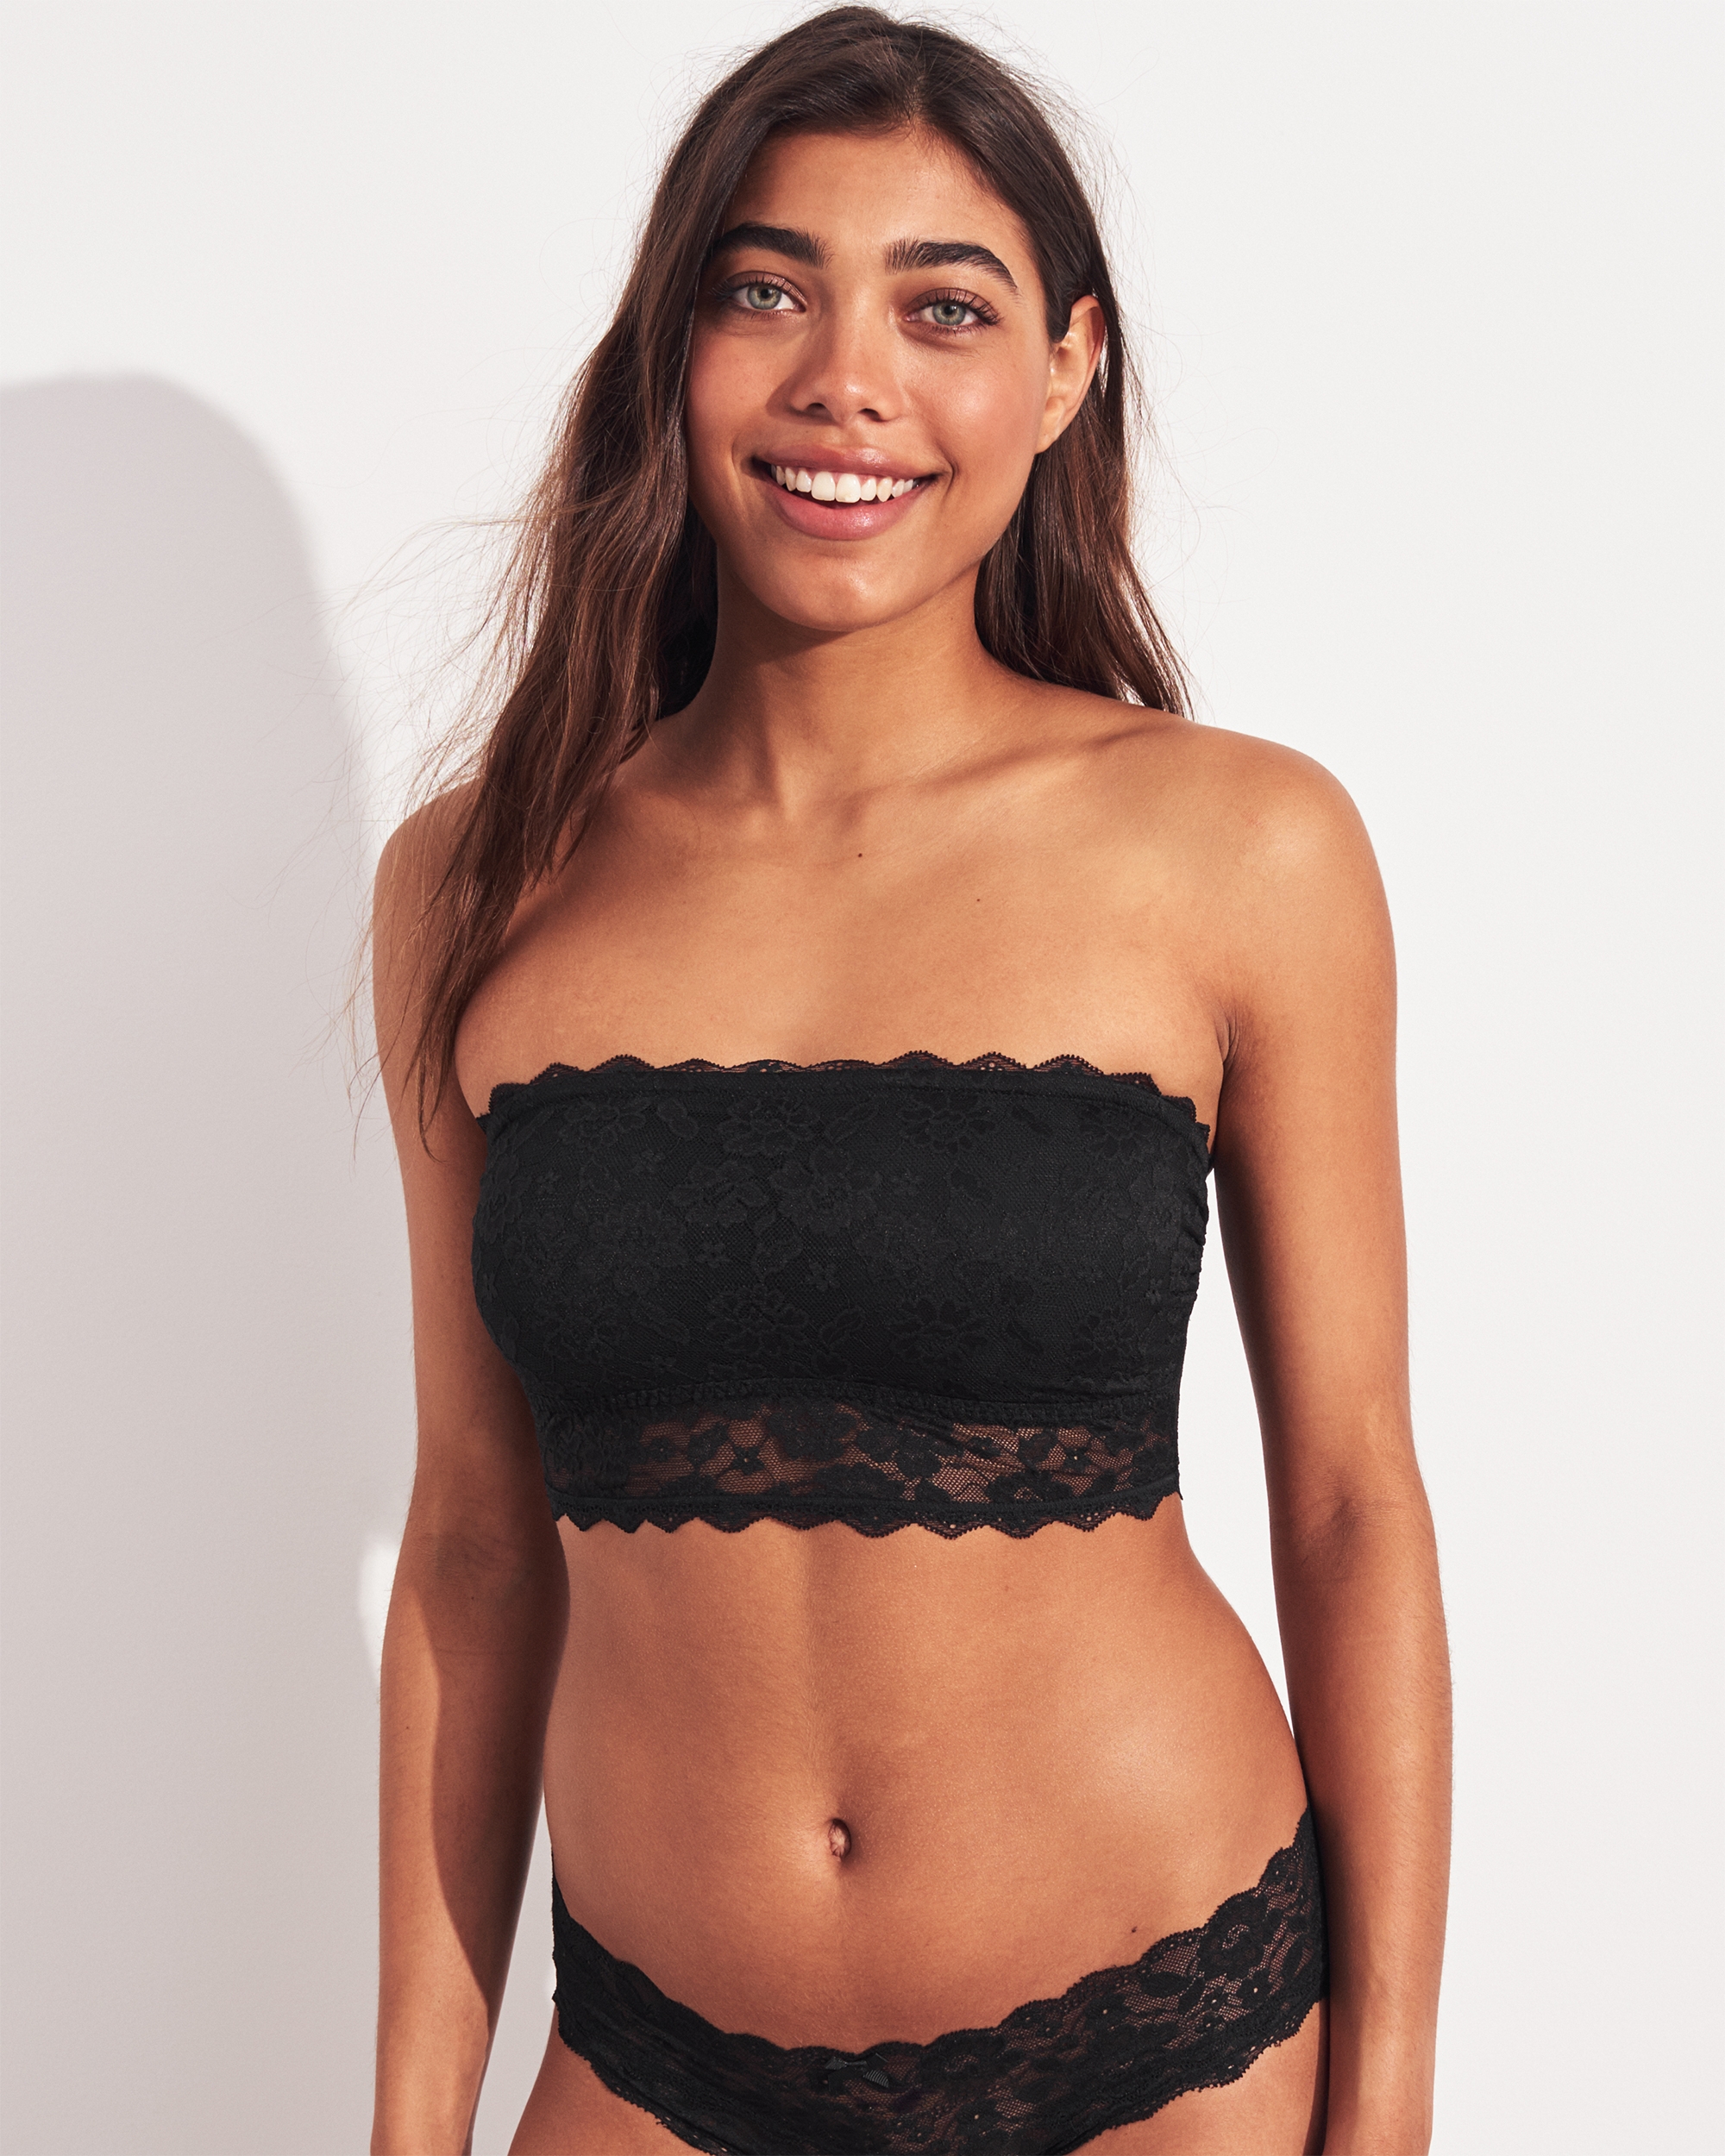 Hollister Gilly Hicks Lace Bandeau